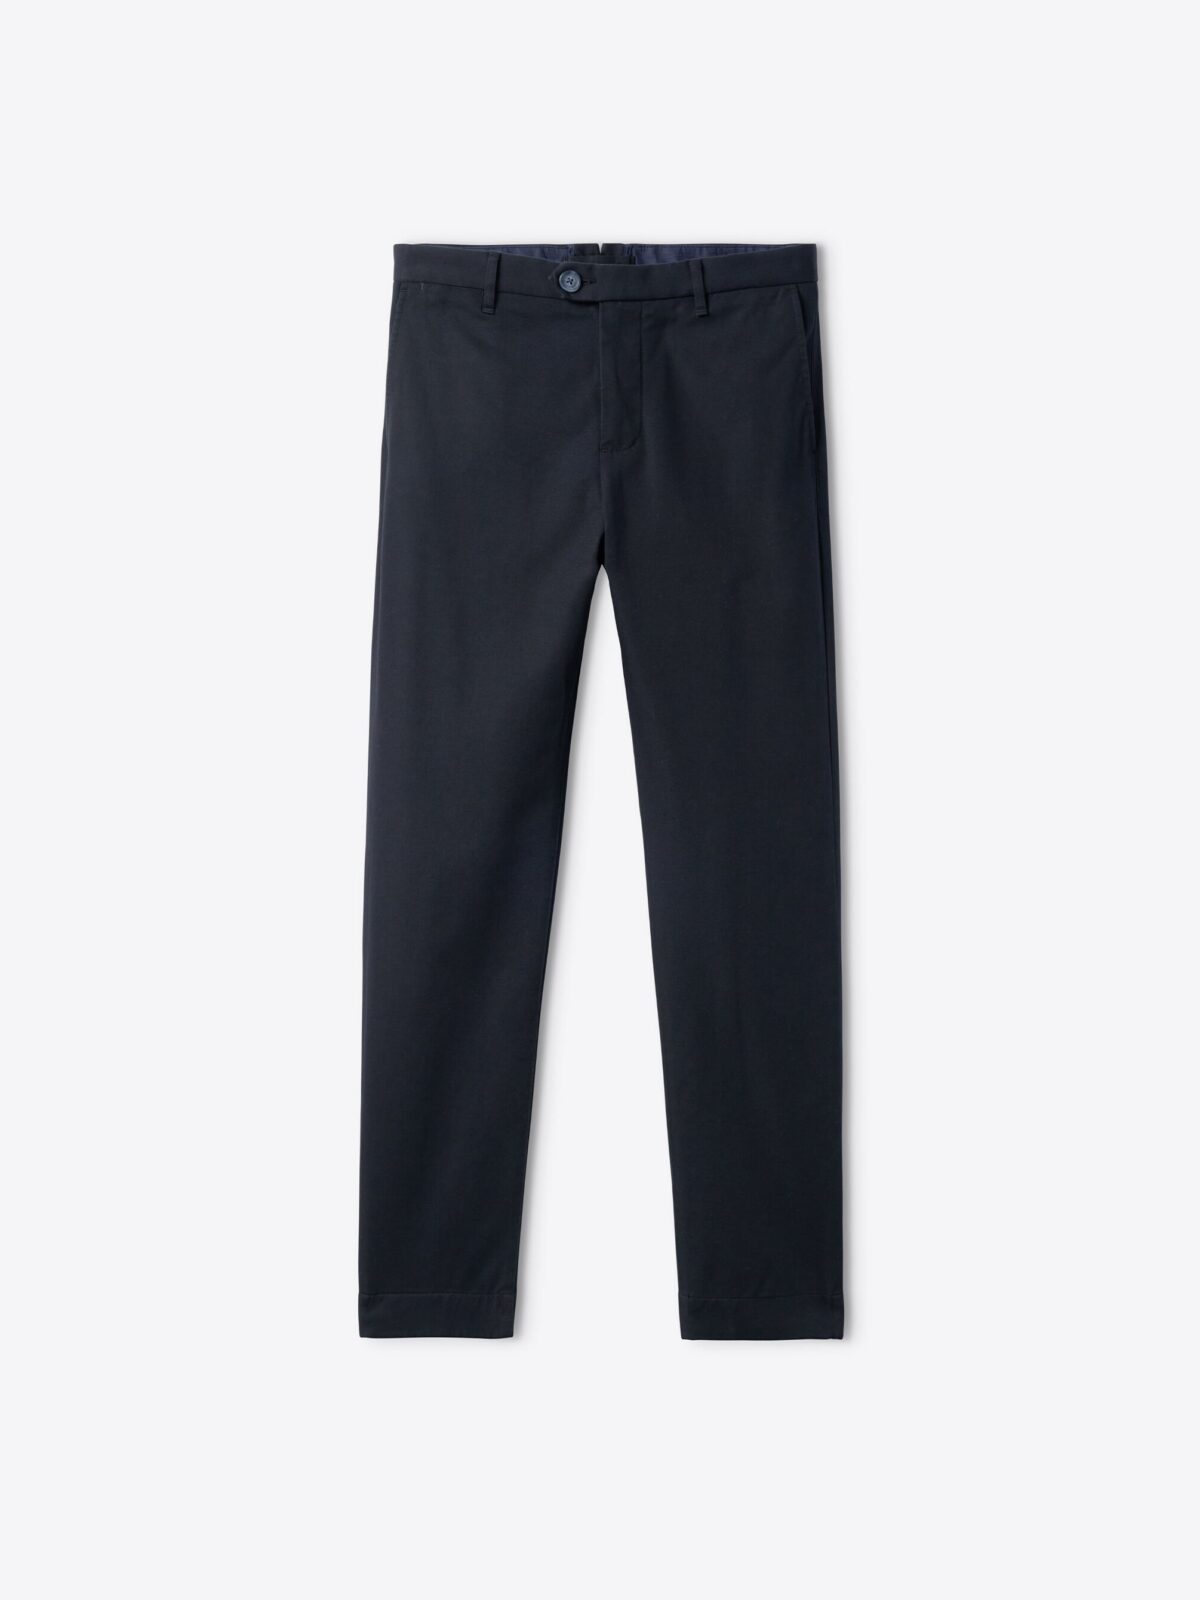 Buy Light Grey Machine Washable Plain Front Smart Trousers from Next Spain